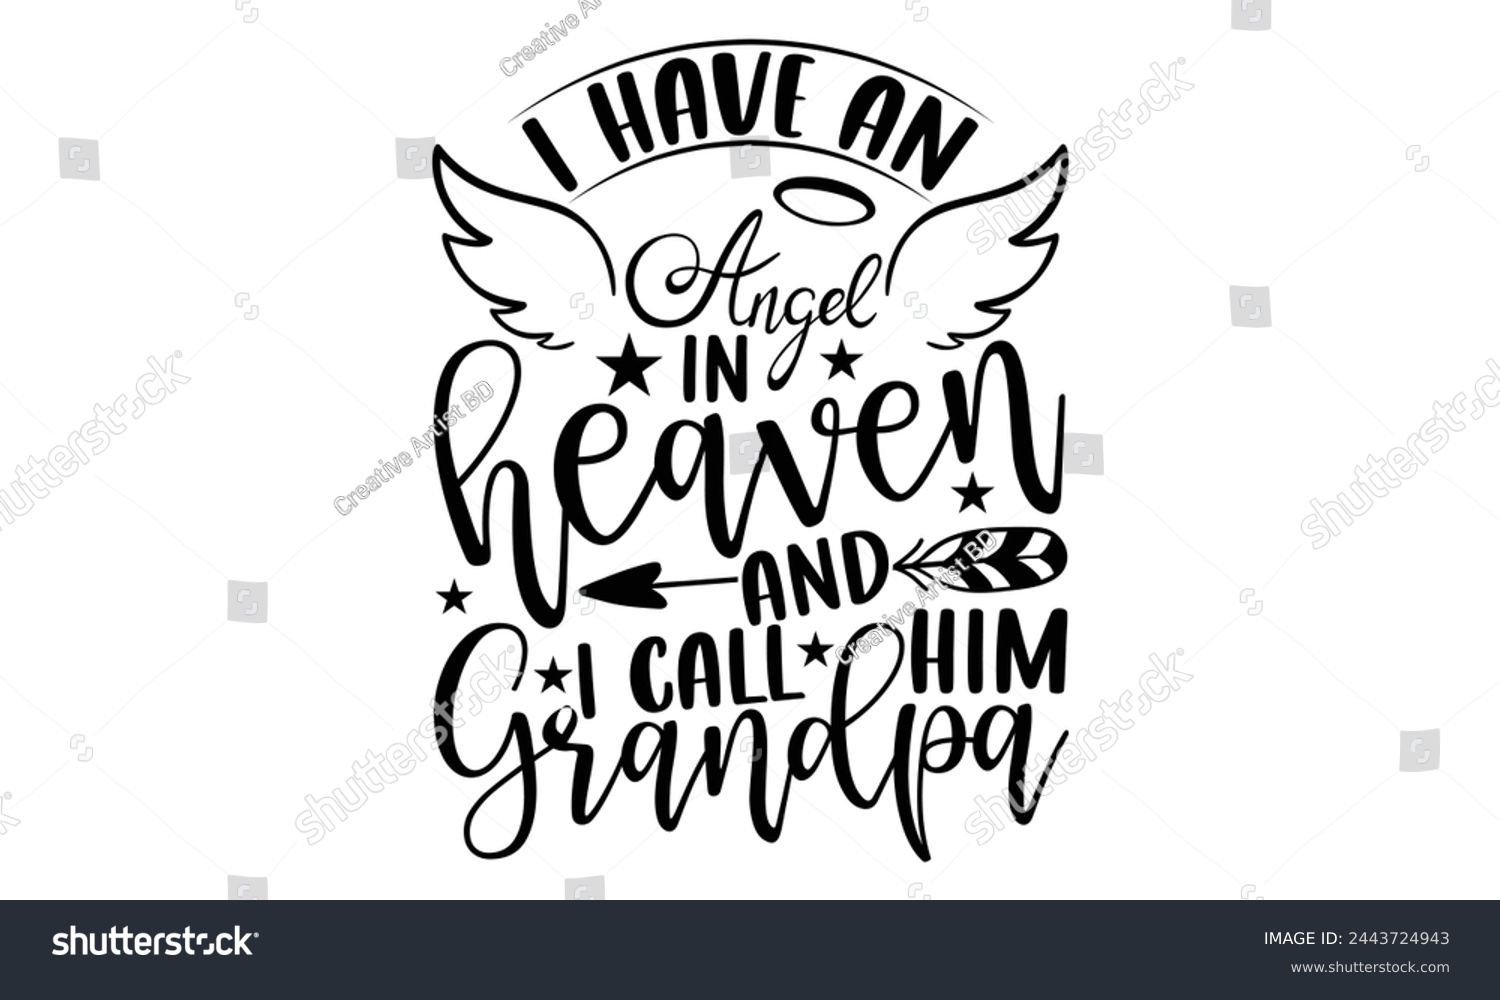 SVG of I Have An Angel In Heaven And I Call Him Grandpa - Memorial T shirt Design, Handmade calligraphy vector illustration, Typography Vector for poster, banner, flyer and mug. svg